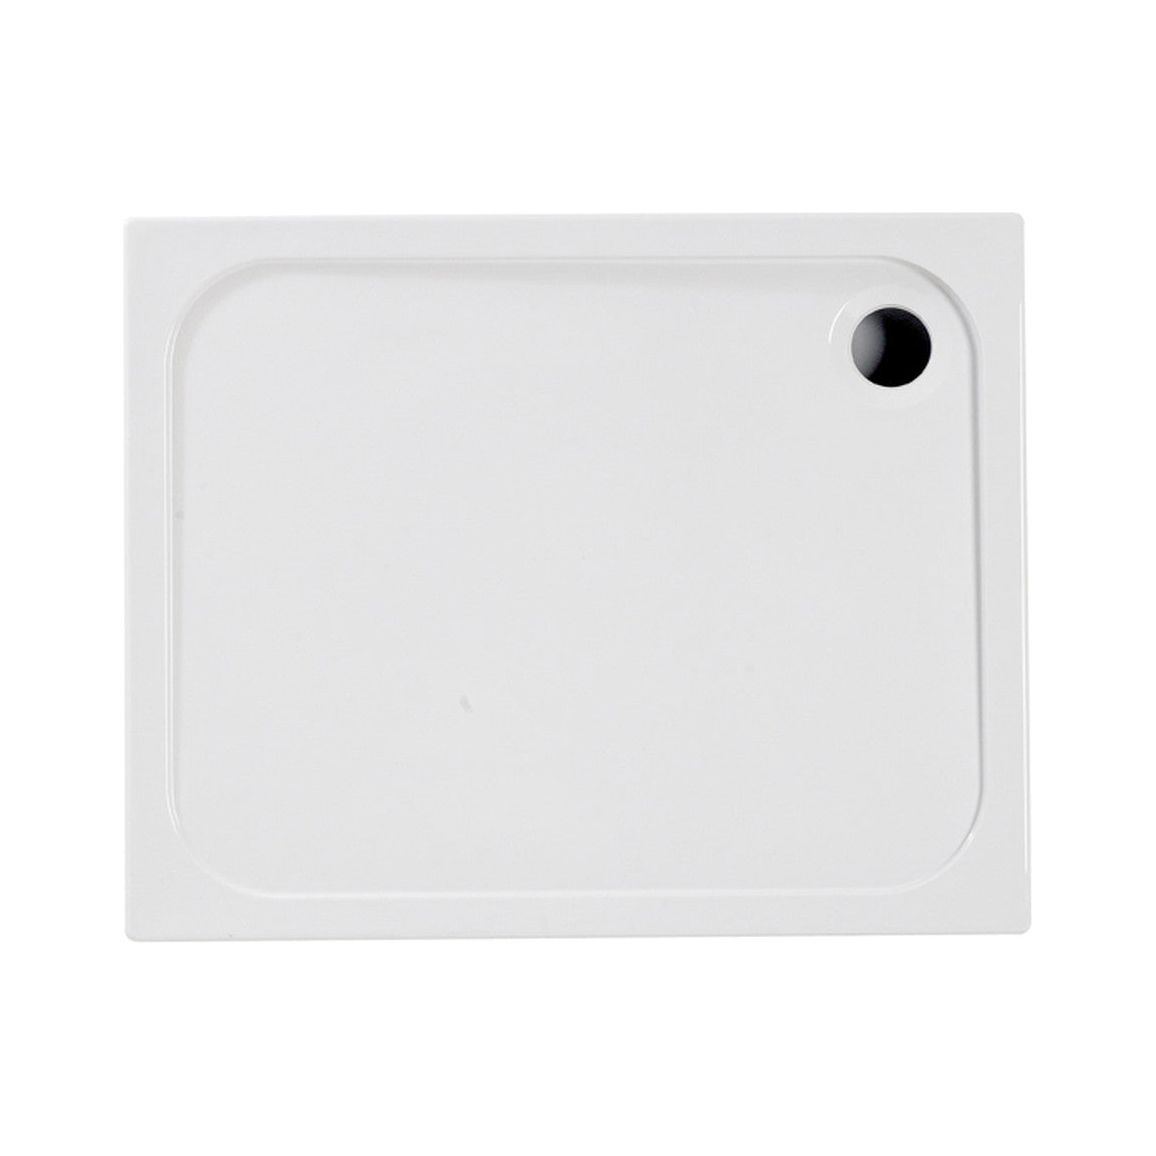 45mm Low Profile 1500x760mm Rectangular Tray & Waste